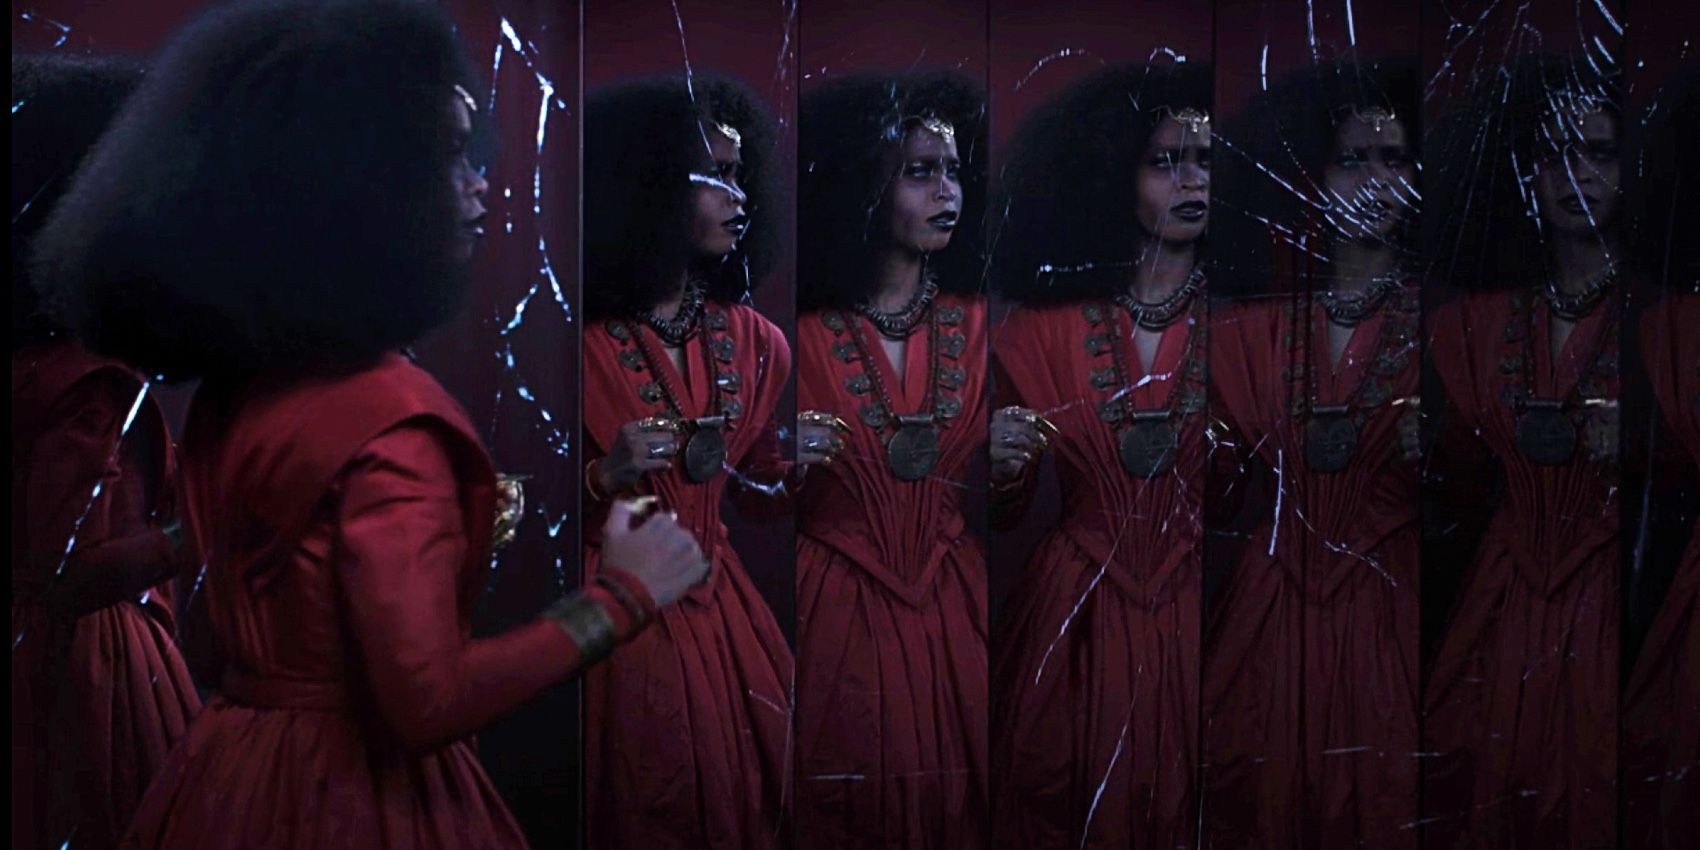 Quvenzhane Wallis as Bloody Mary in American Horror Stories S2 Ending